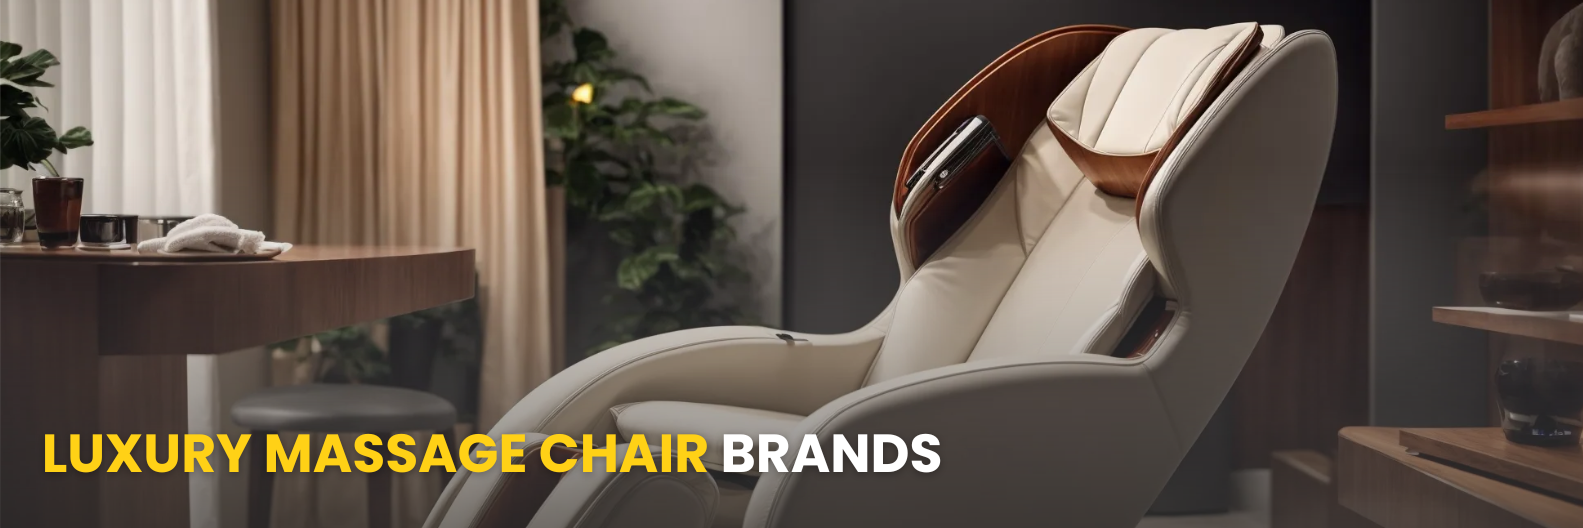 Some of the best massage chair brands that offer state-of-the-art features and top-tier comfort include Daiwa, Osaki, Ogawa, and Luraco.